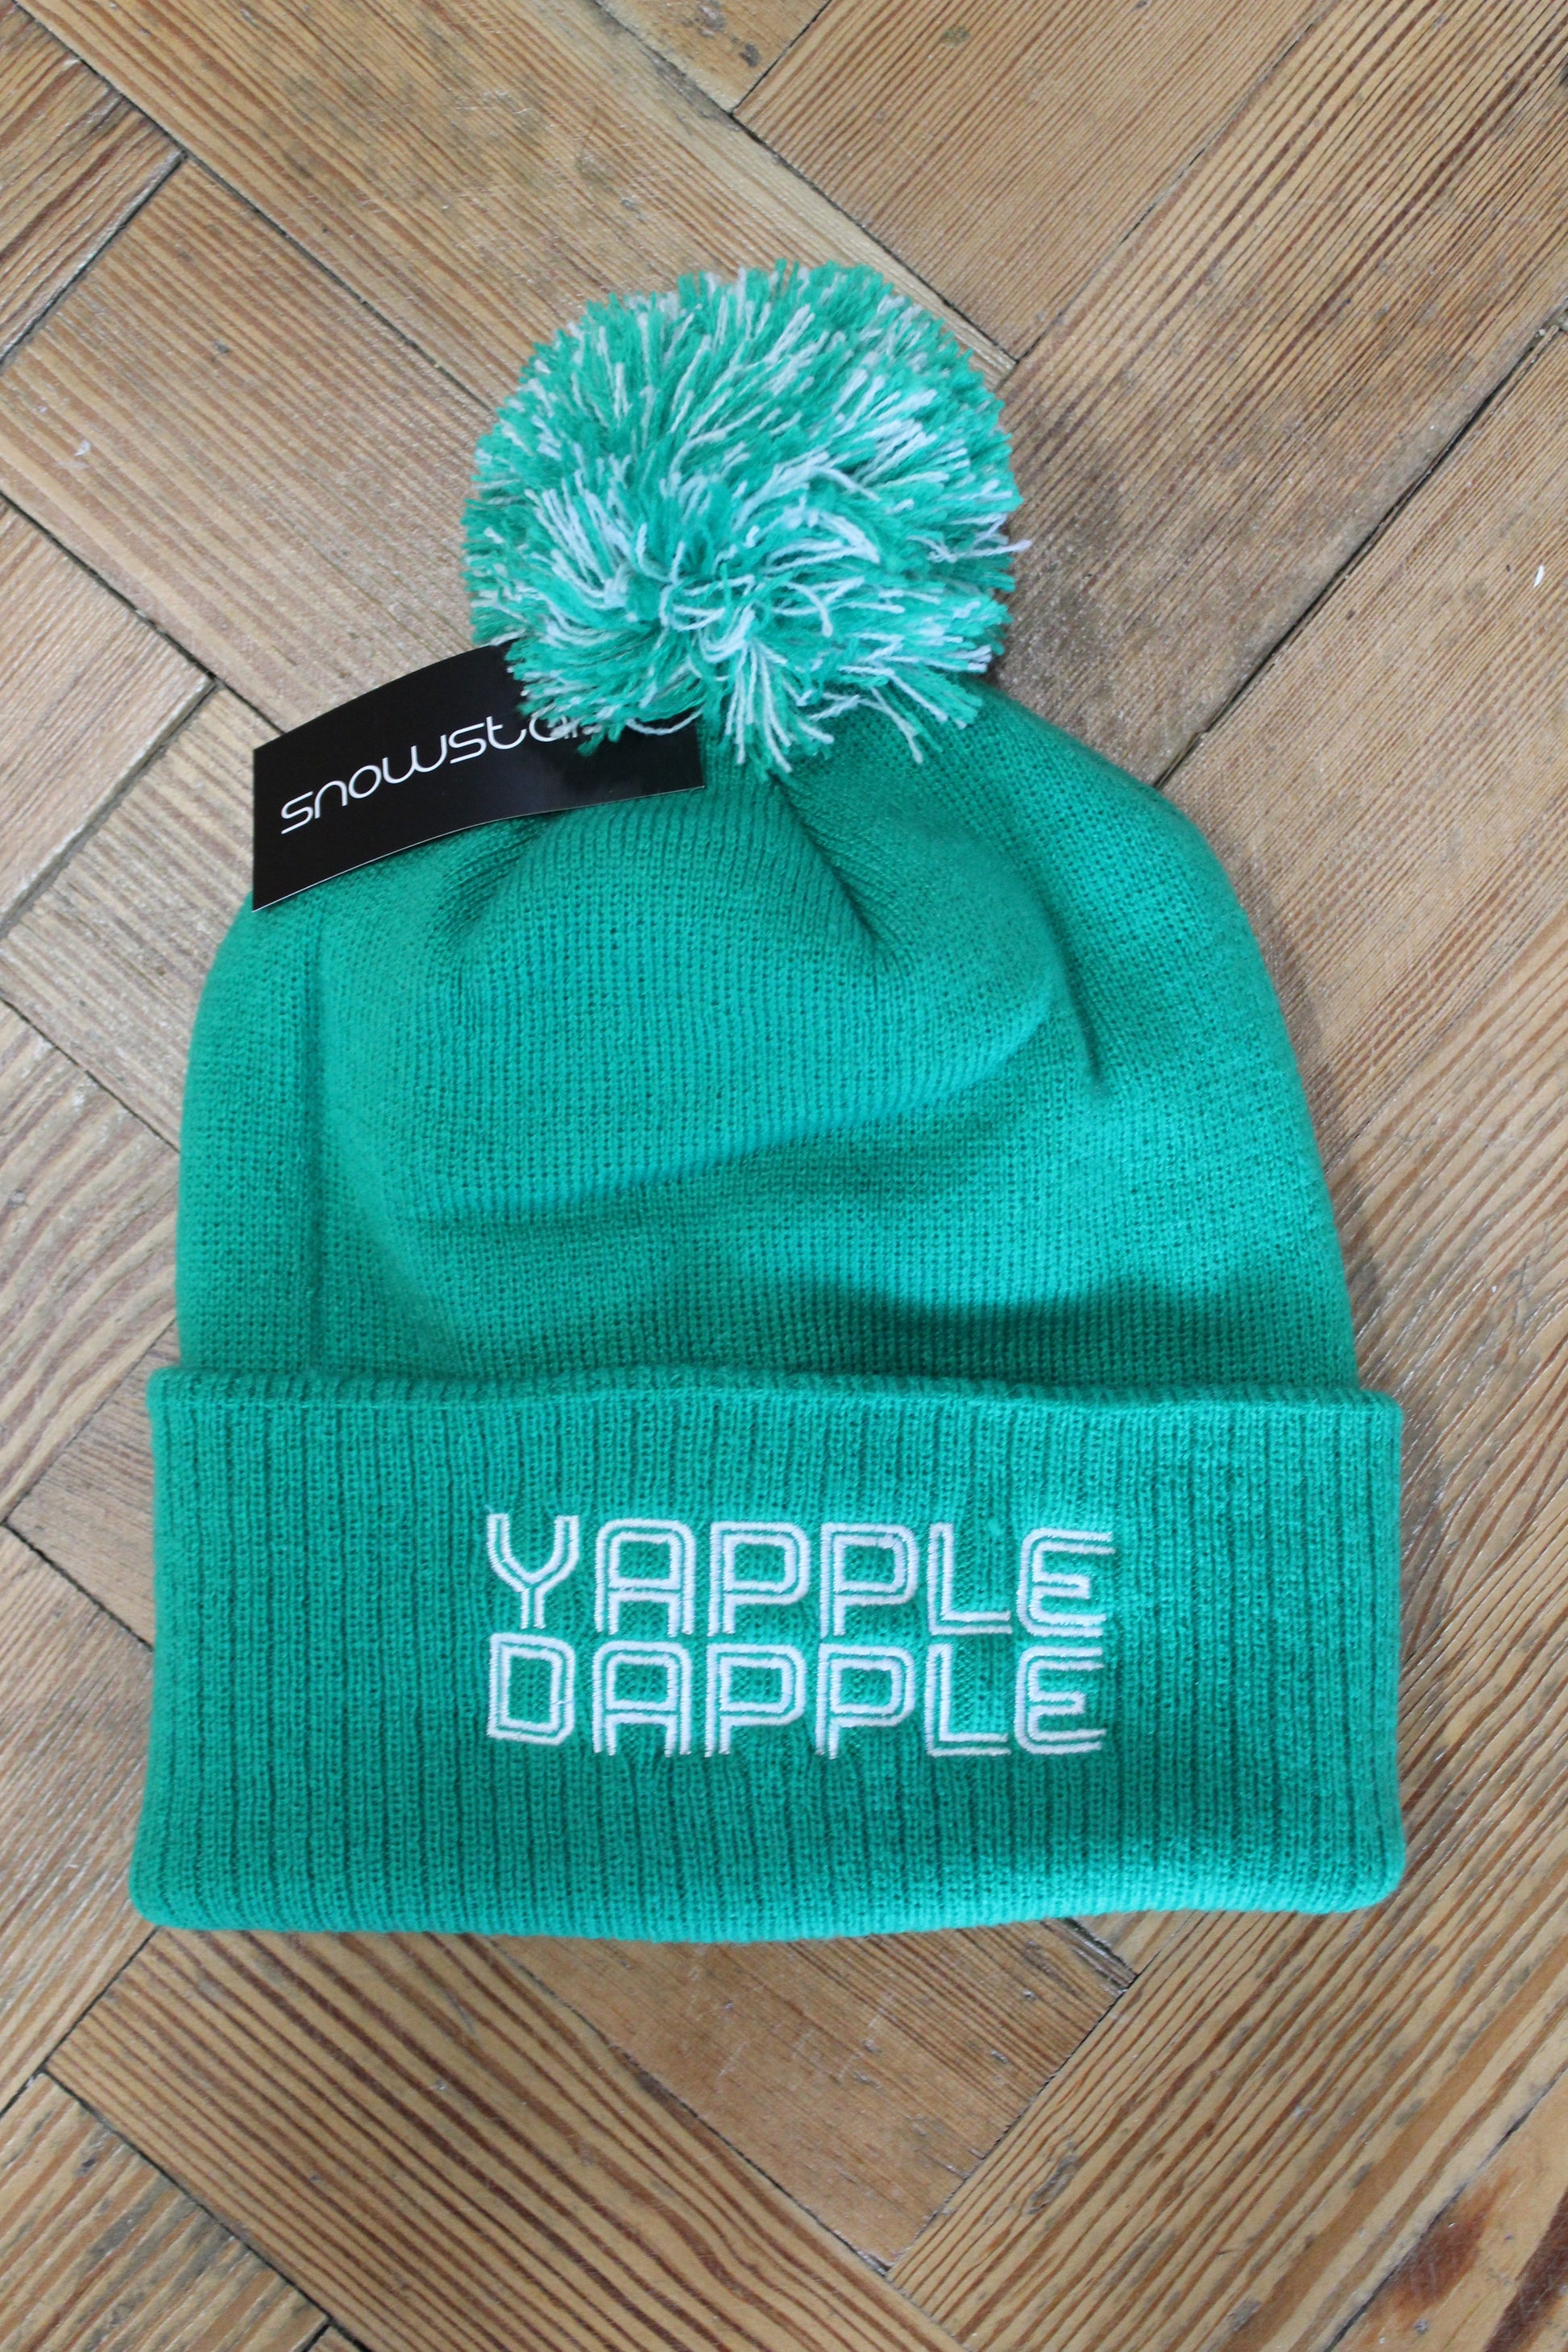 Green Yapple Dapple Beanie with a green and white two-tone bobble